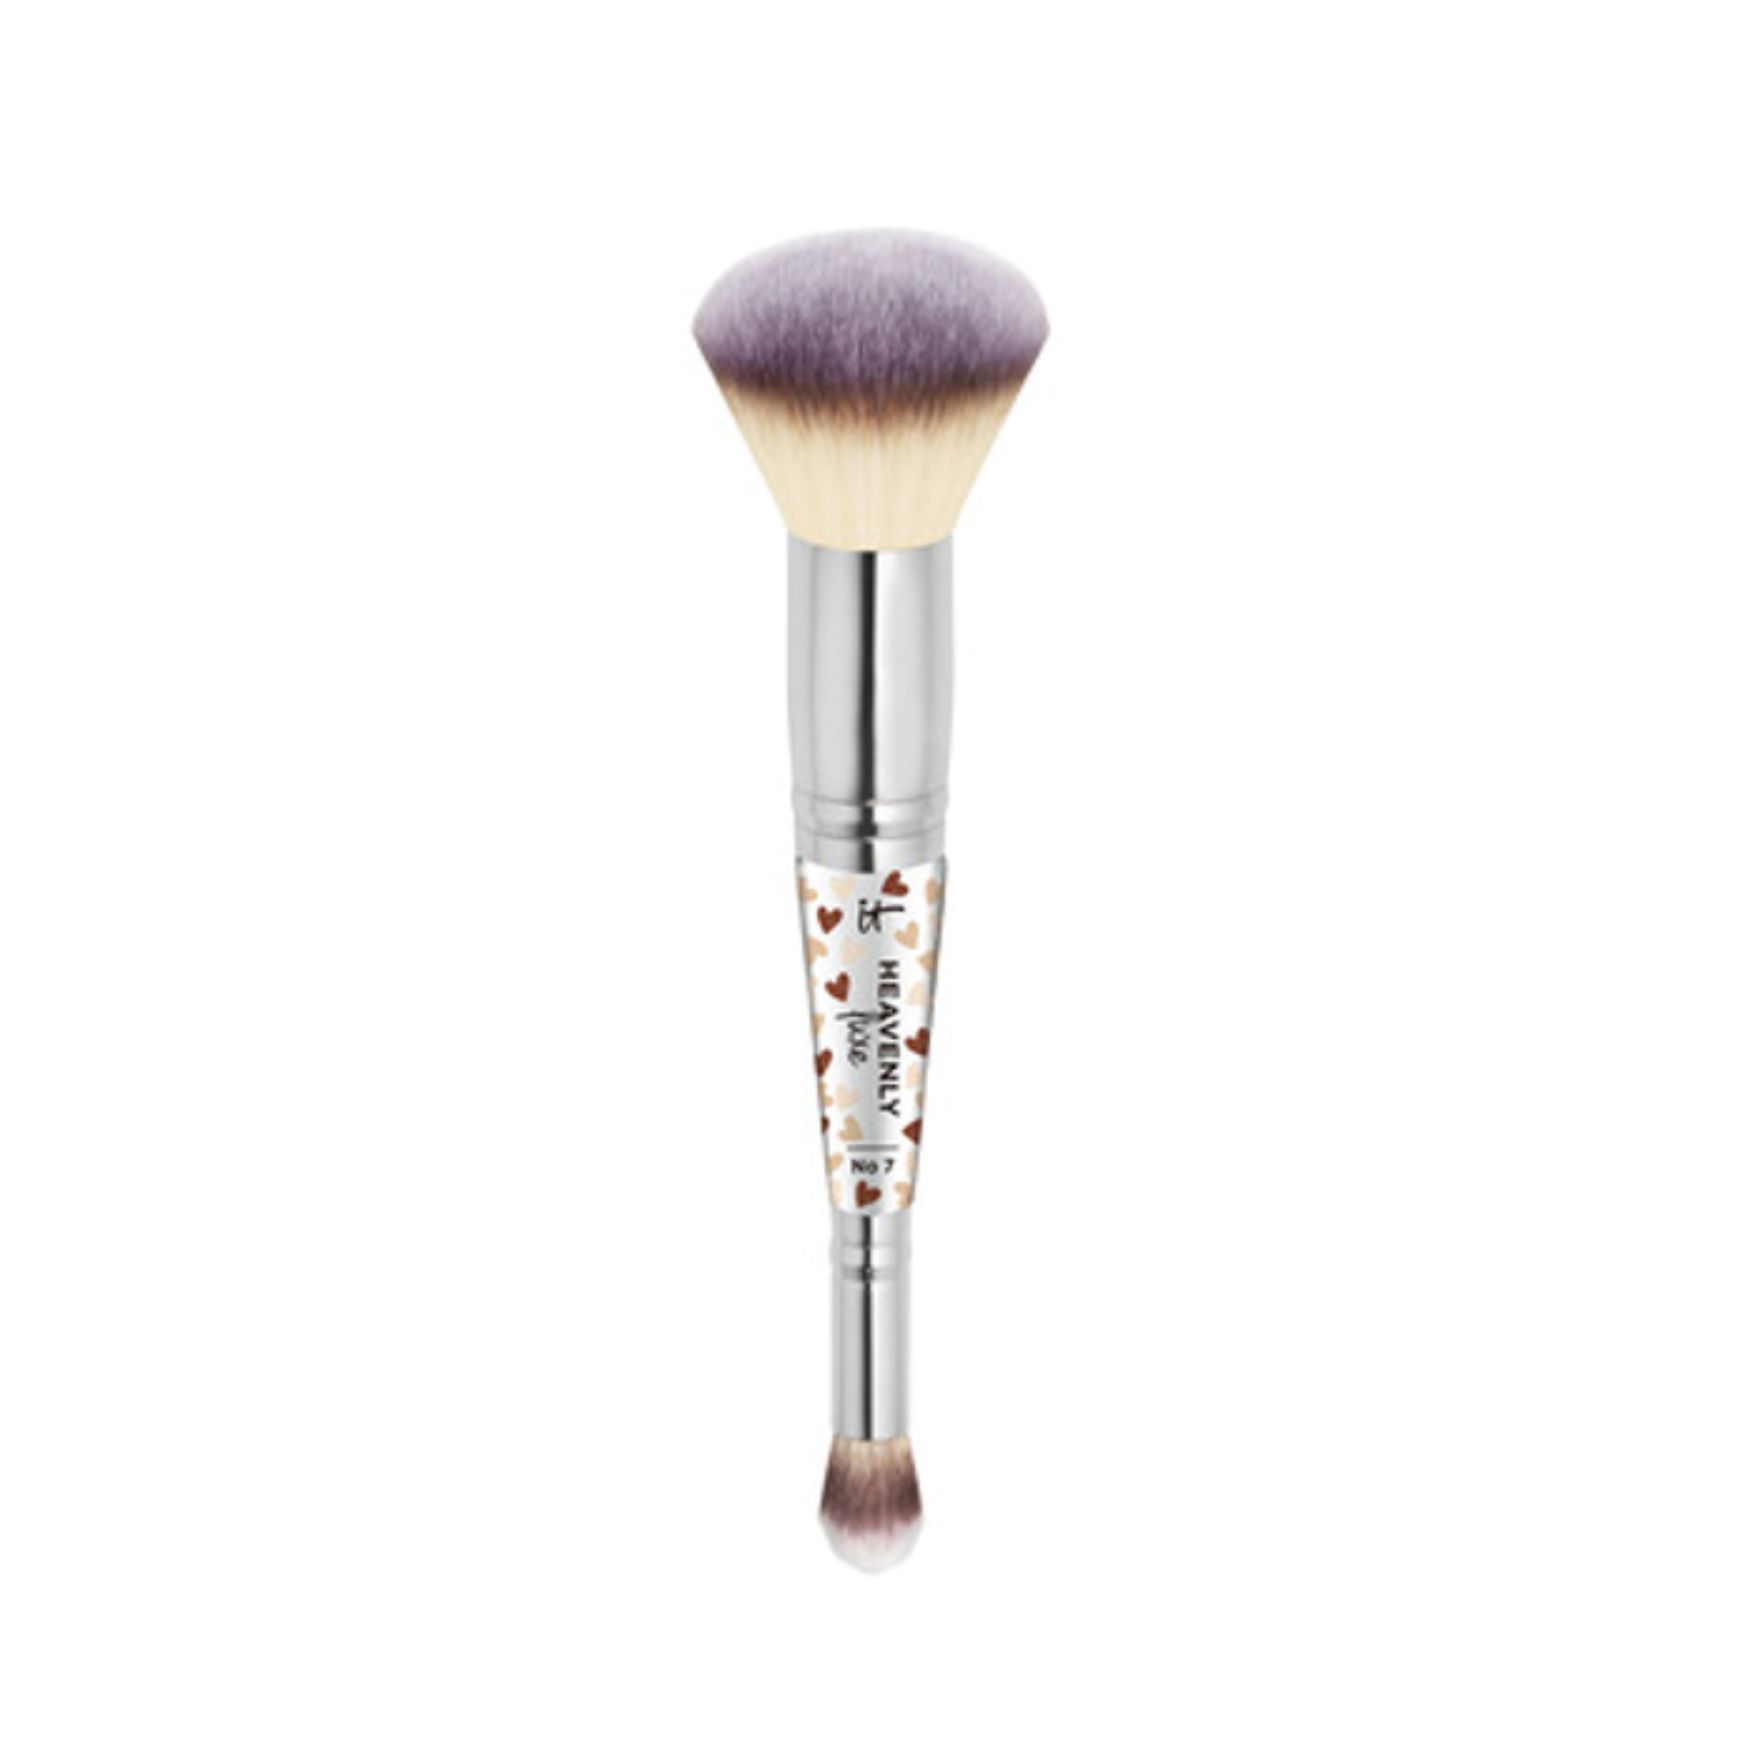 Heavenly Luxe Complexion Perfection Foundation and Concealer Brush | Space NK - UK